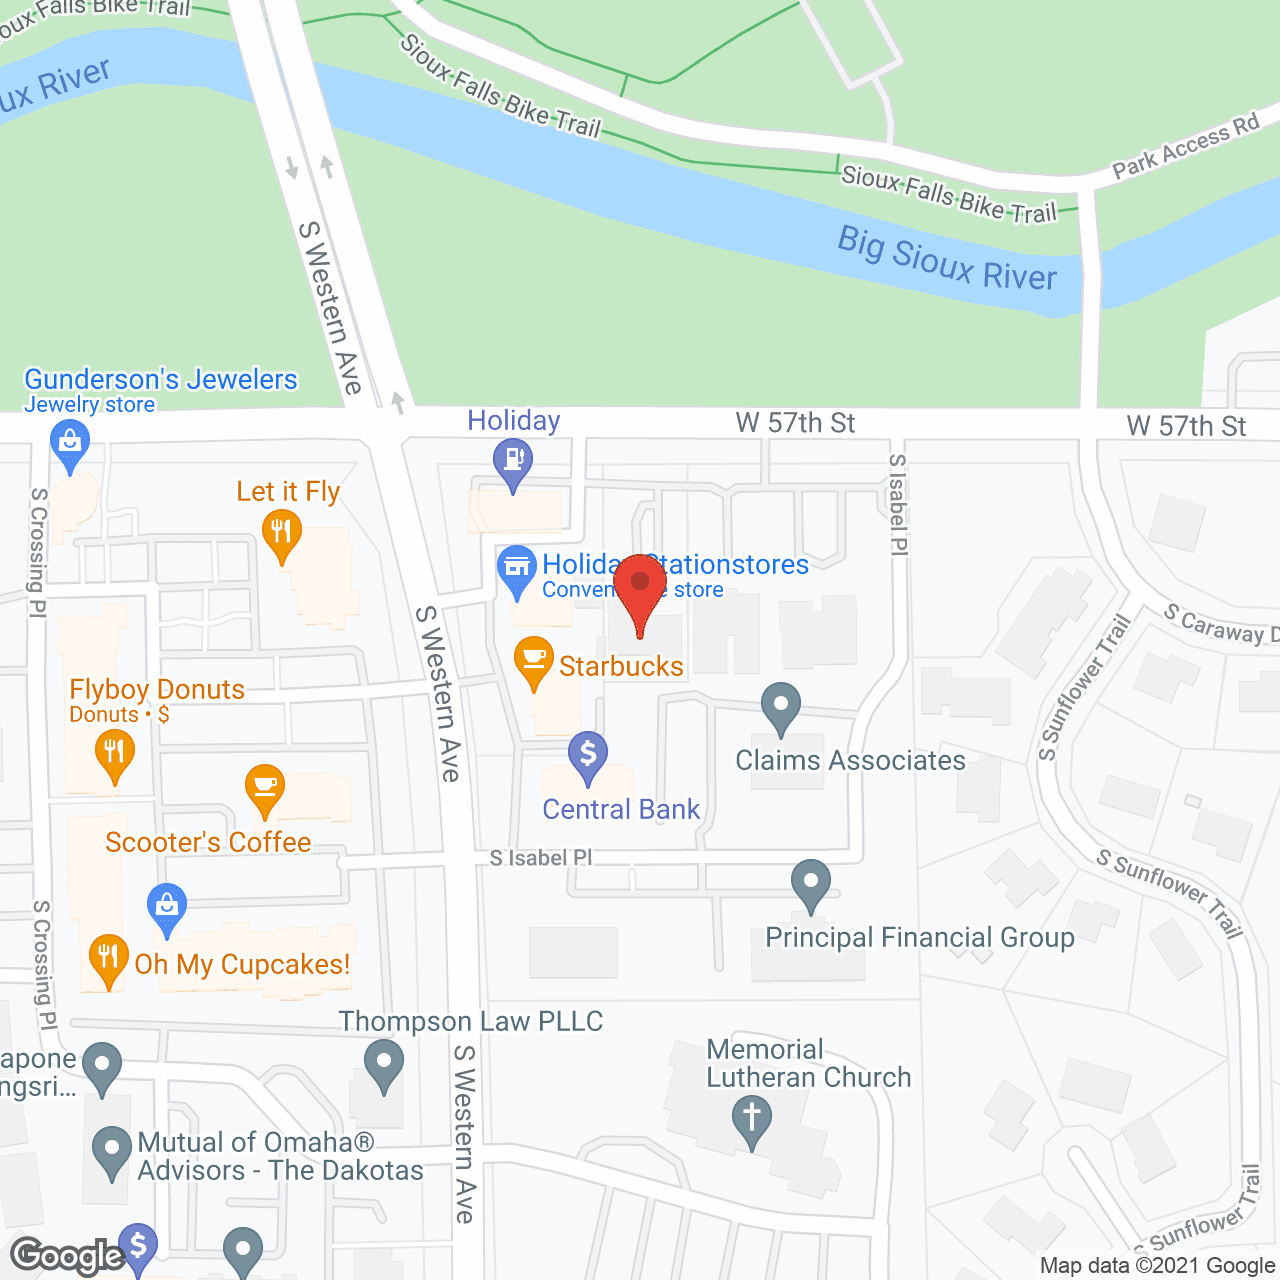 Beverly Healthcare in google map